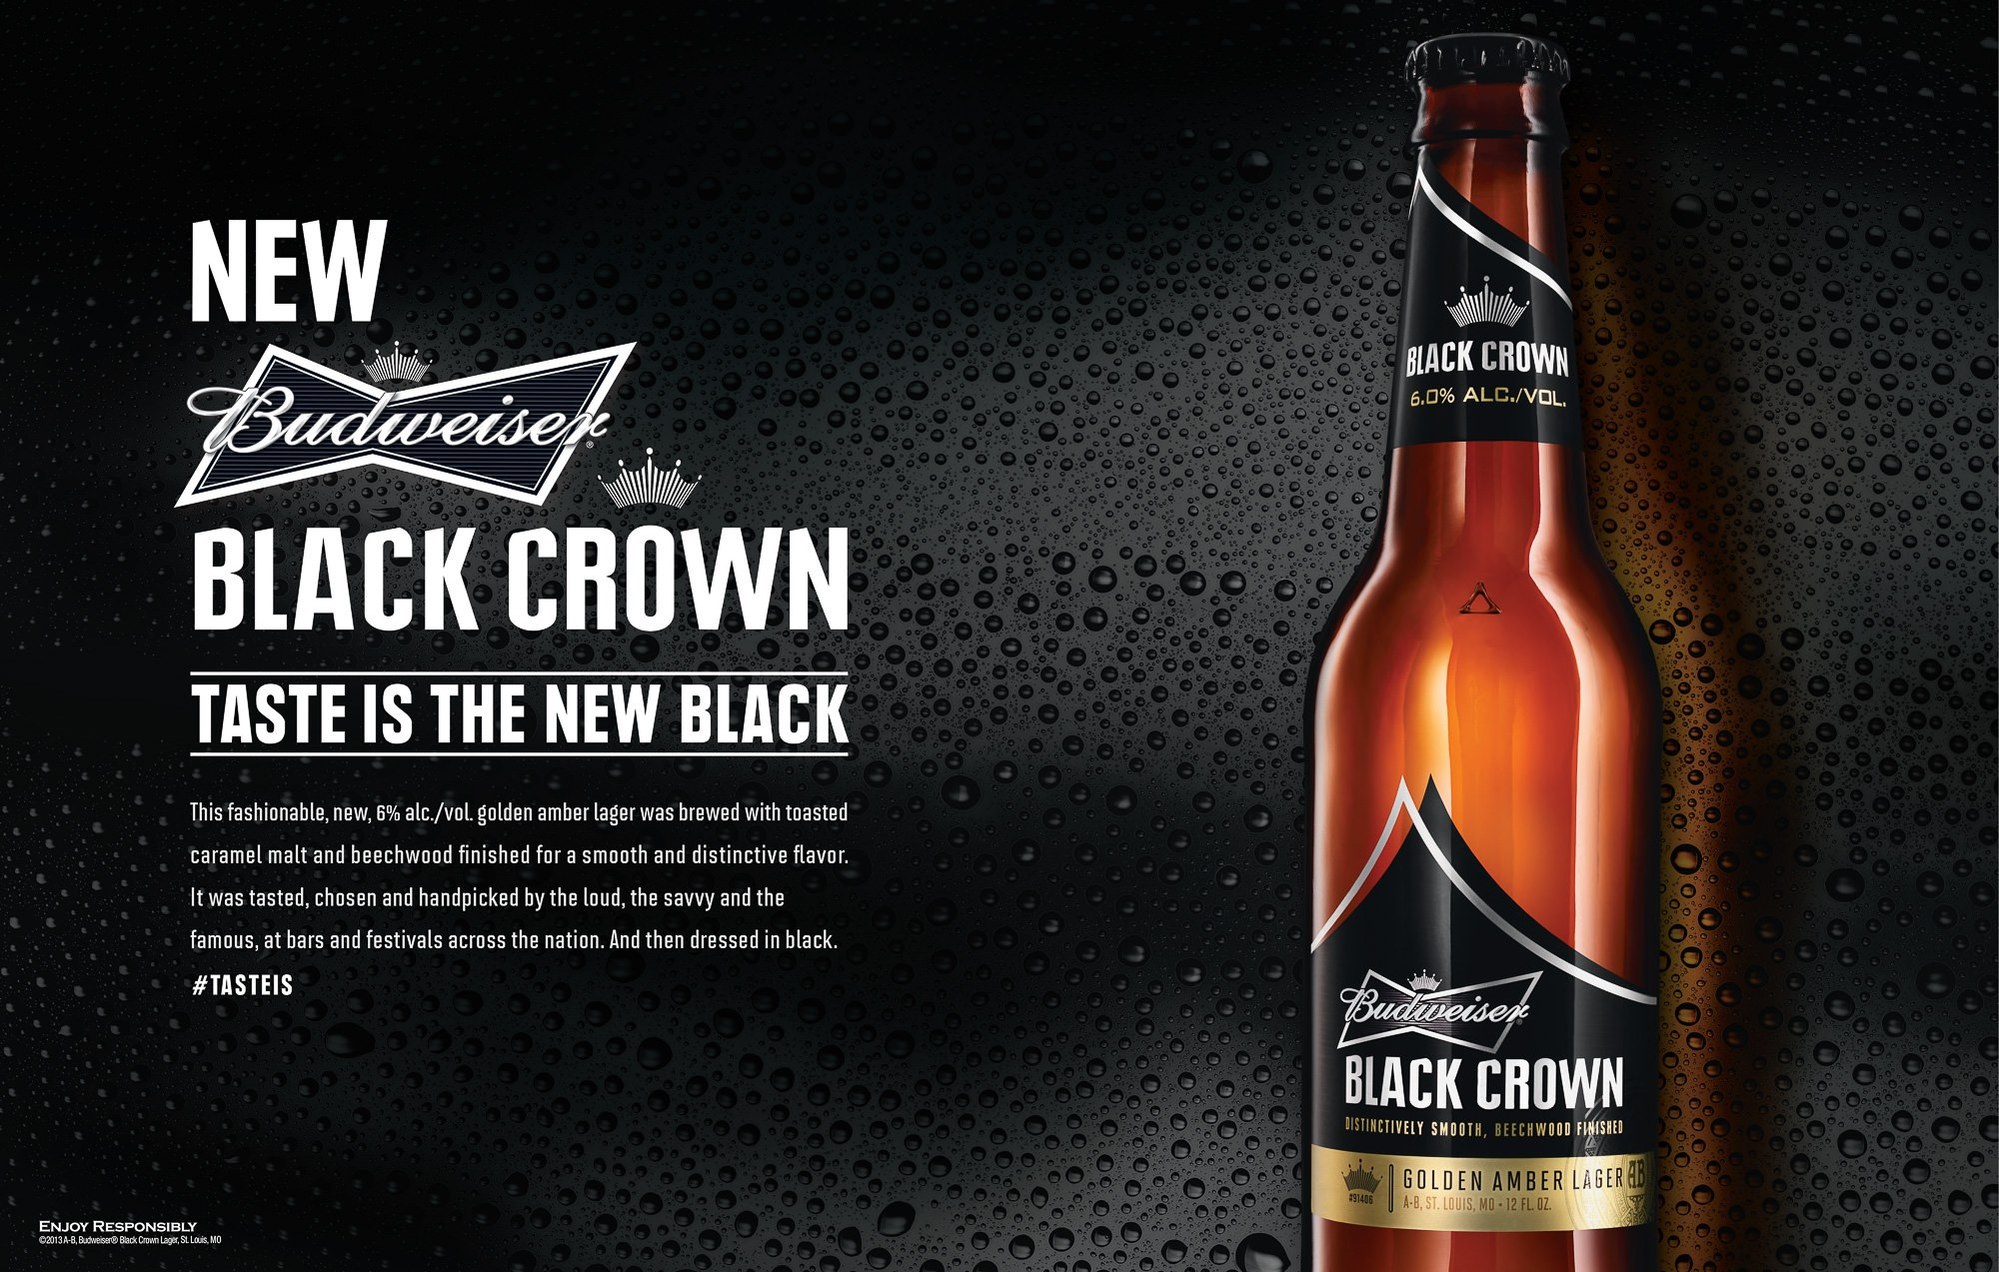 Budweiser Black Crown beer beverage campaign Photography by commercial, product & advertising photographer Timothy Hogan in studio Los Angeles